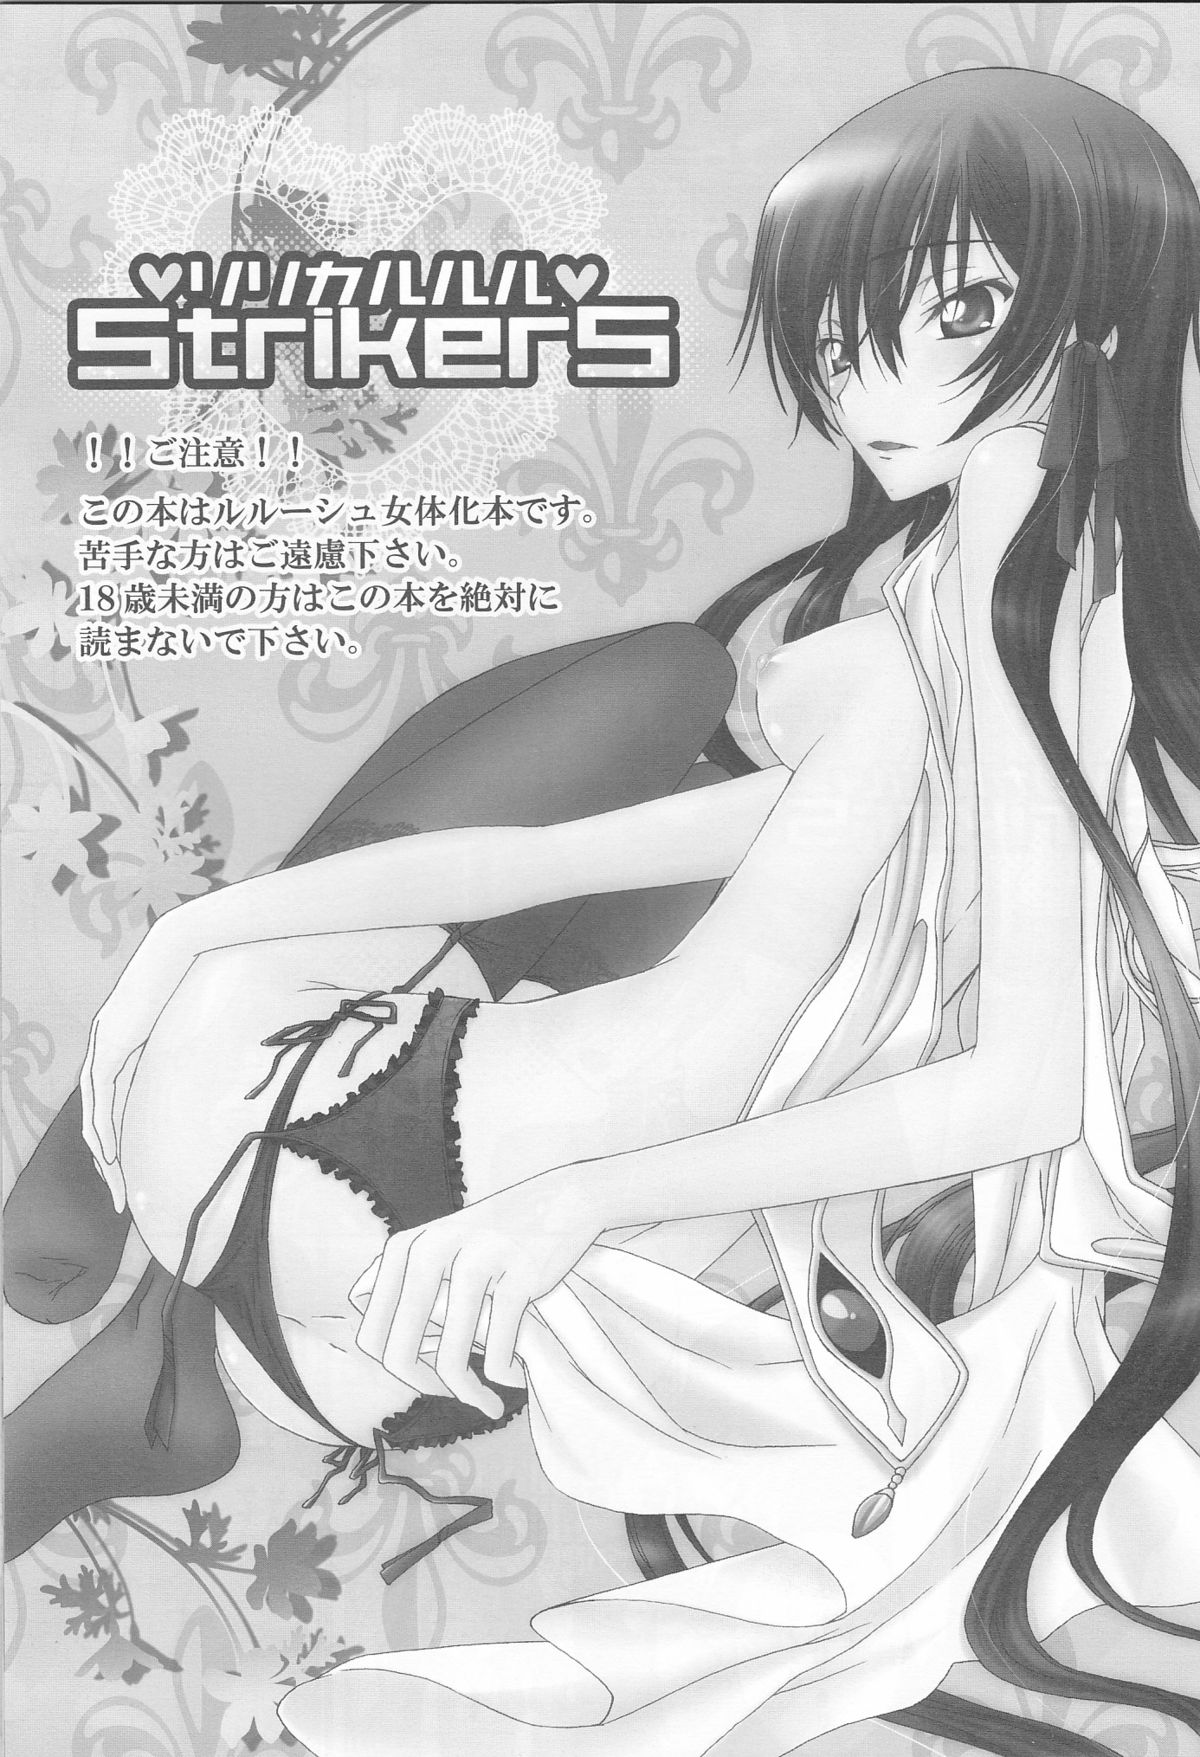 [MAX&COOL. (Sawamura Kina)] Lyrical Rule StrikerS (CODE GEASS: Lelouch of the Rebellion) page 3 full